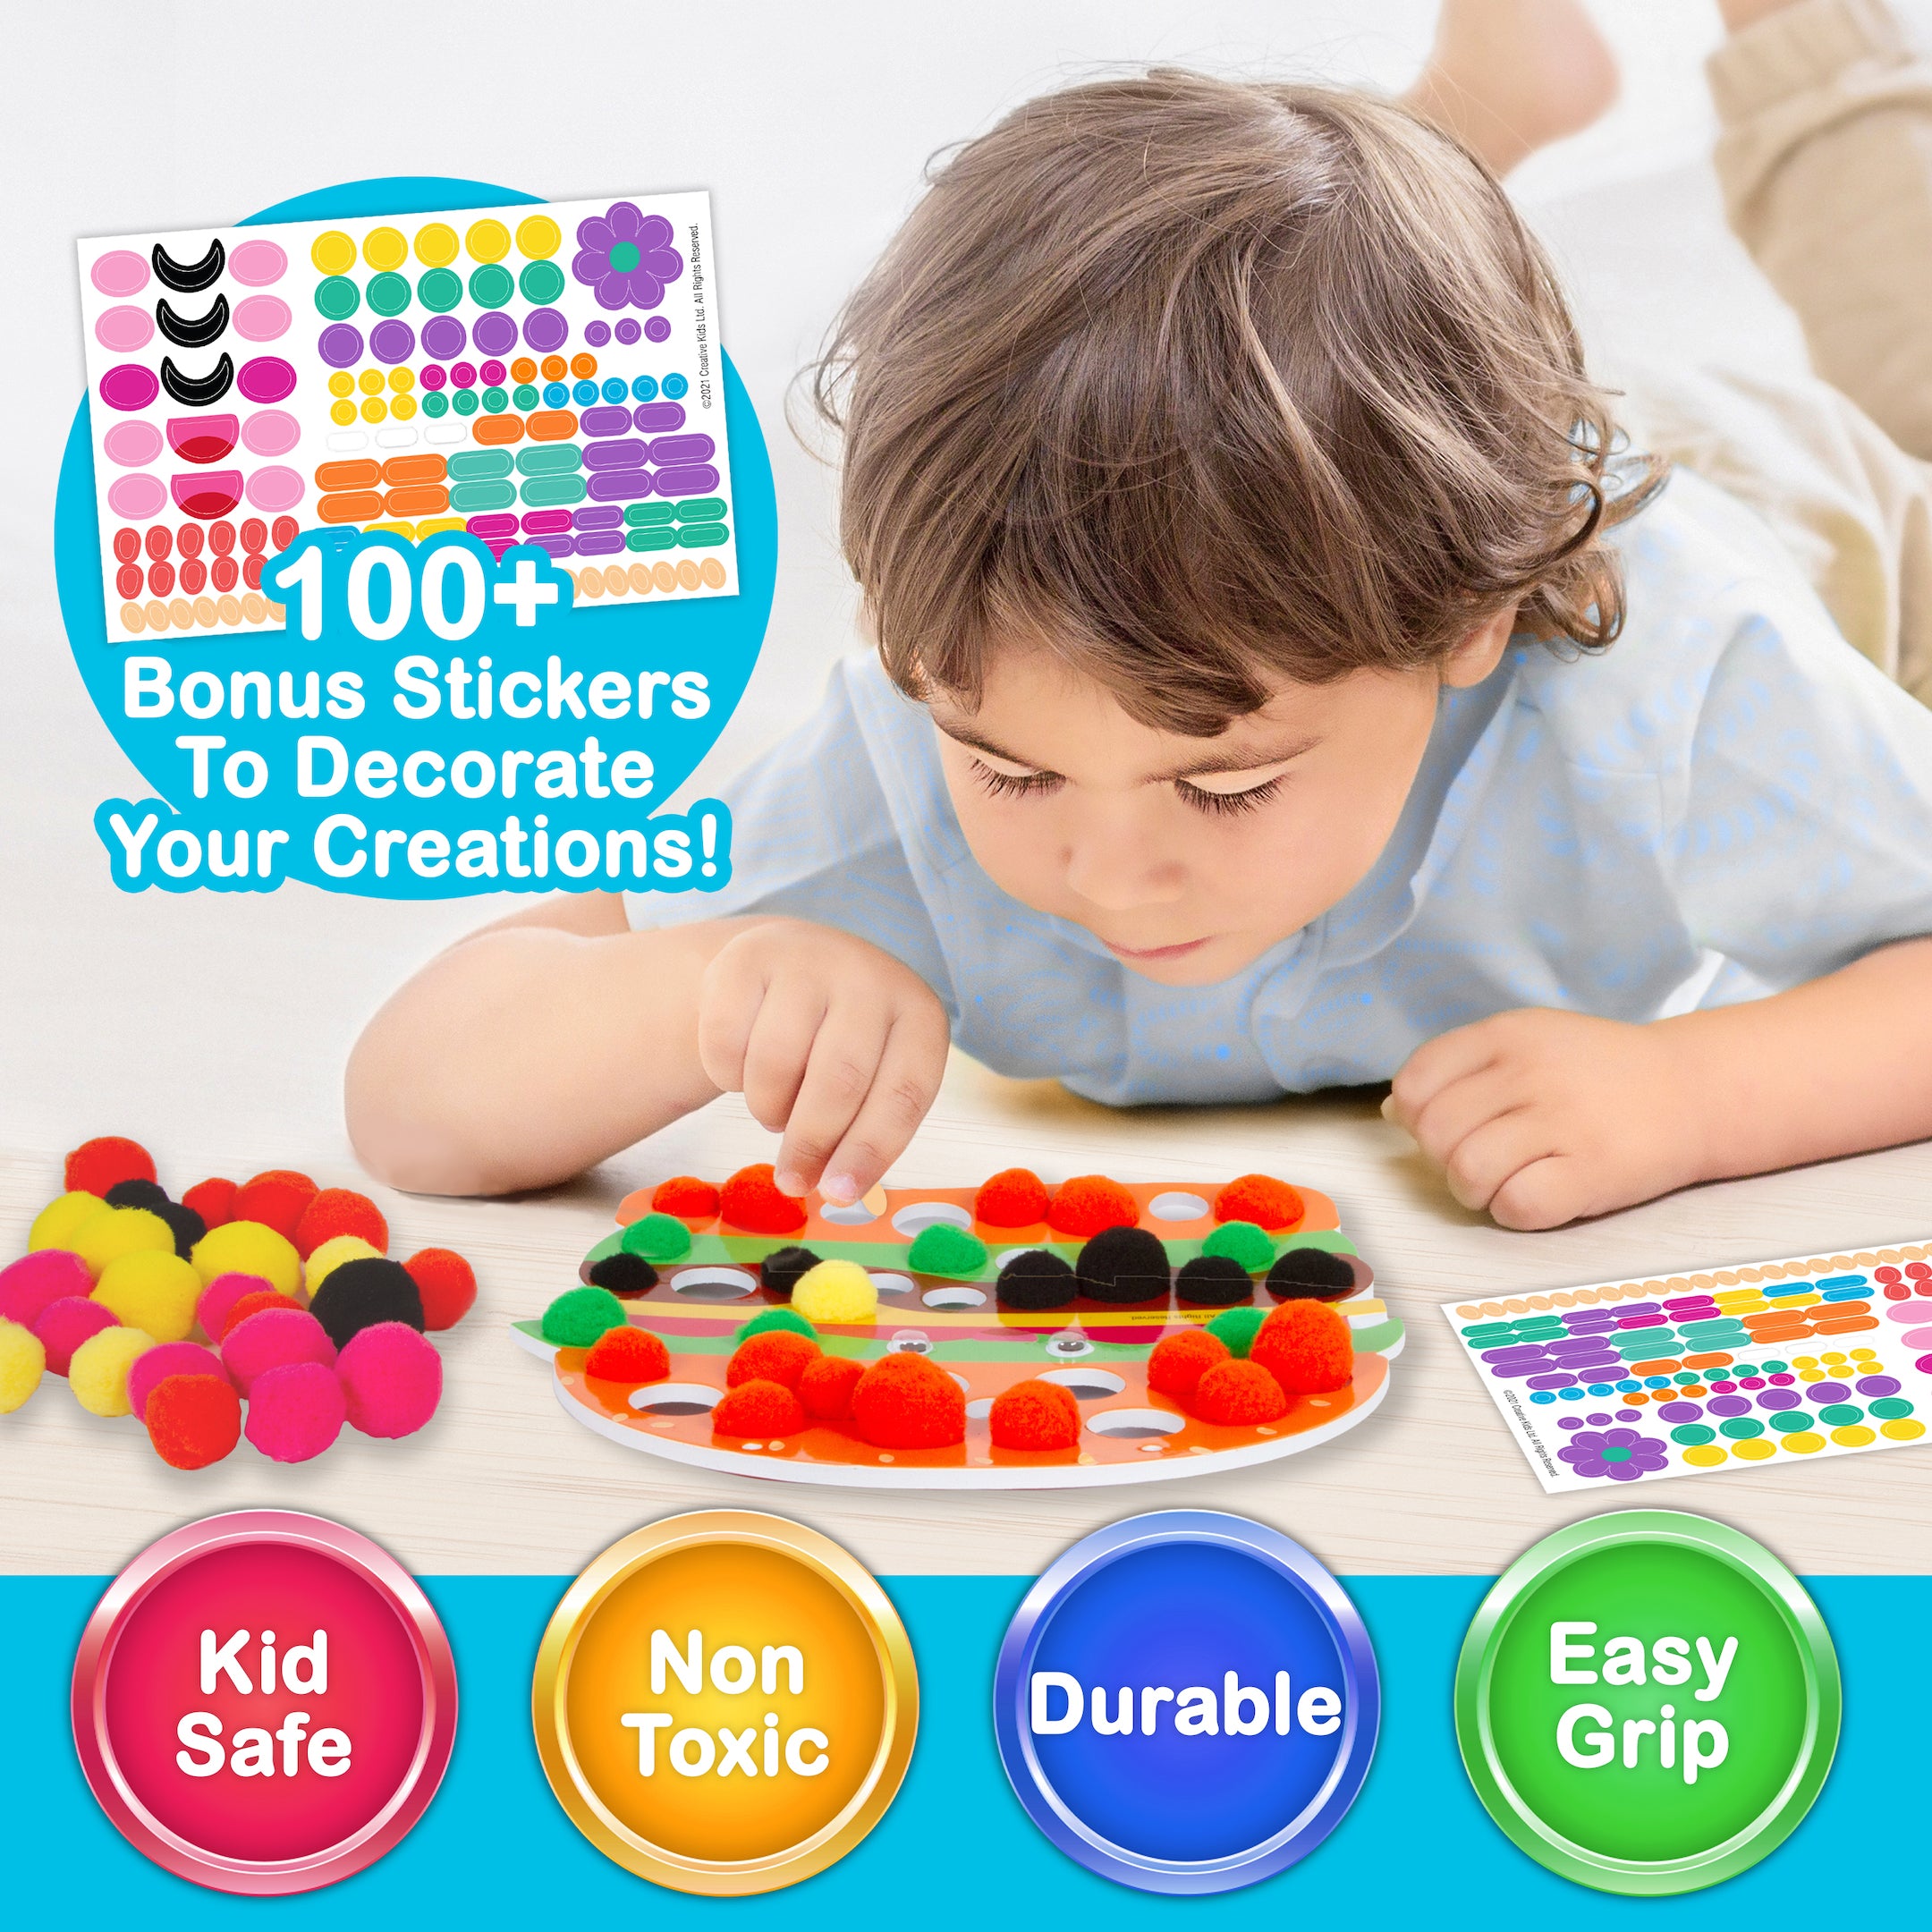 Kids Art Kit and Craft Supplies, 1000+ Pieces Foam, Pompoms, Feathers, –  BrightCreationsOfficial